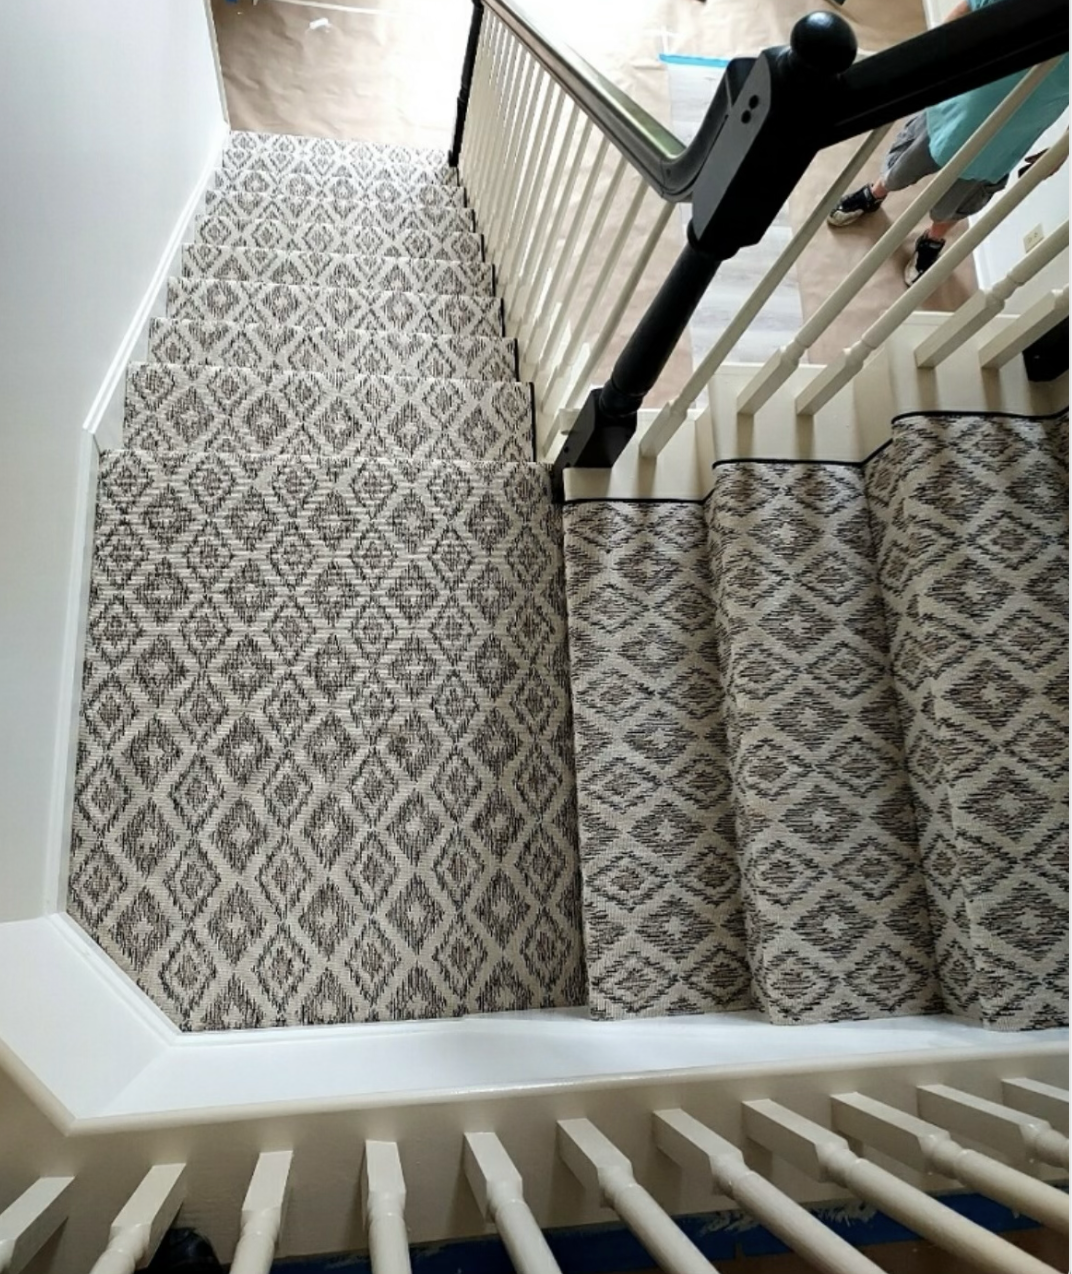 Stair Runners:

Our custom stair runners offer a luxury and tailored look.  Our customers can choose from the hundreds of remnants we have in stock to find what will work best in their space.  Carpet One Lexington is the only flooring store in the Bluegrass that delivers custom stair runners including binding with cotton or leather, surging and borders.